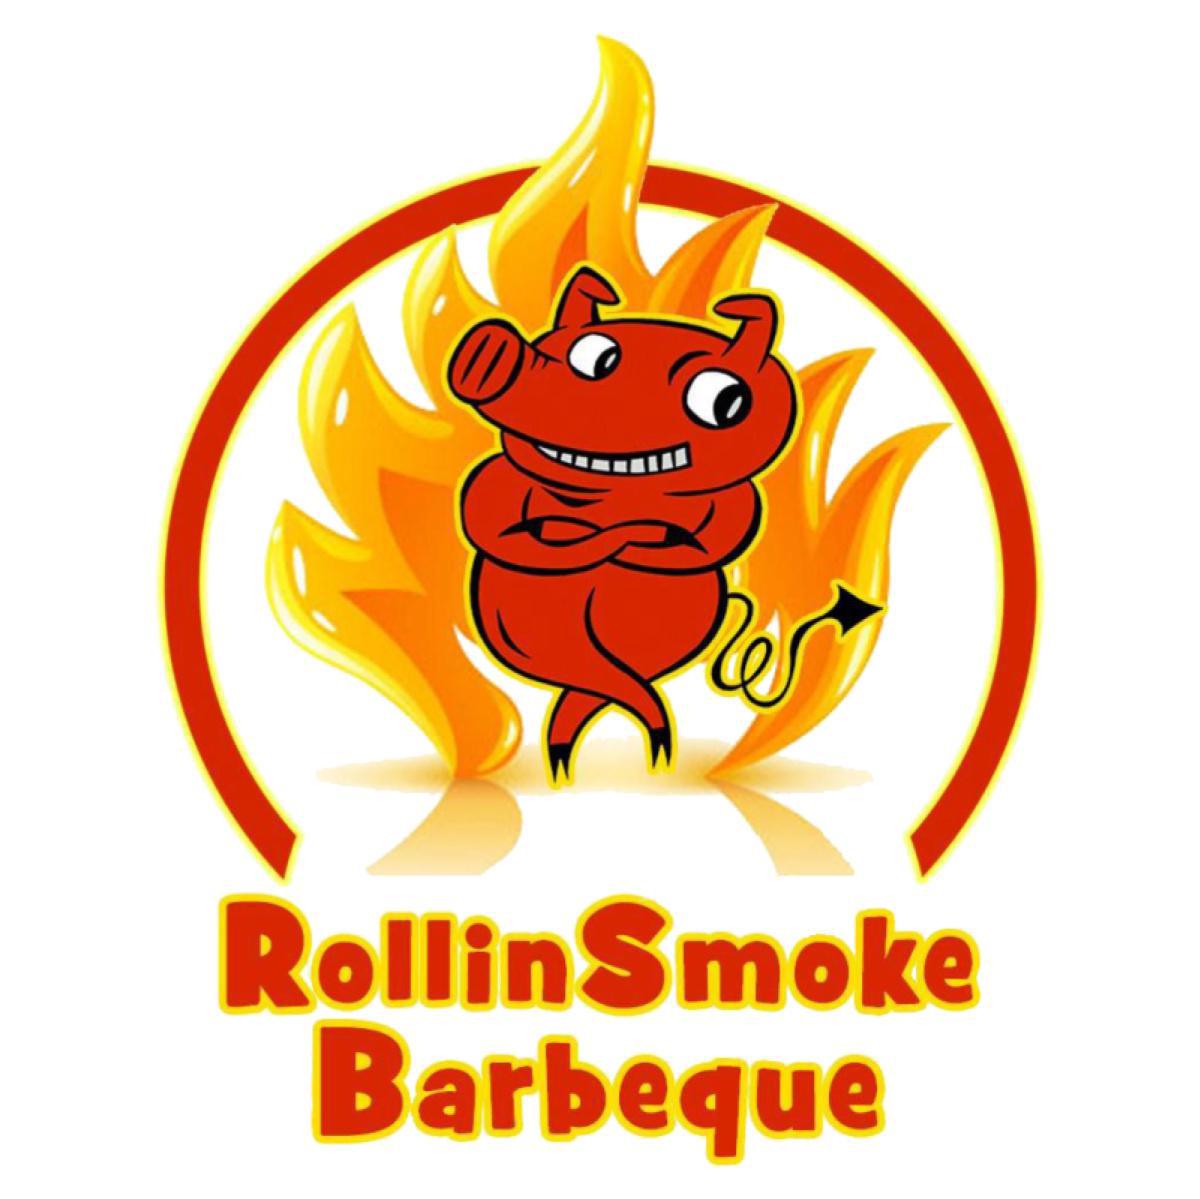 Rollin Smoke Barbeque @ S. Grand Canyon Dr.